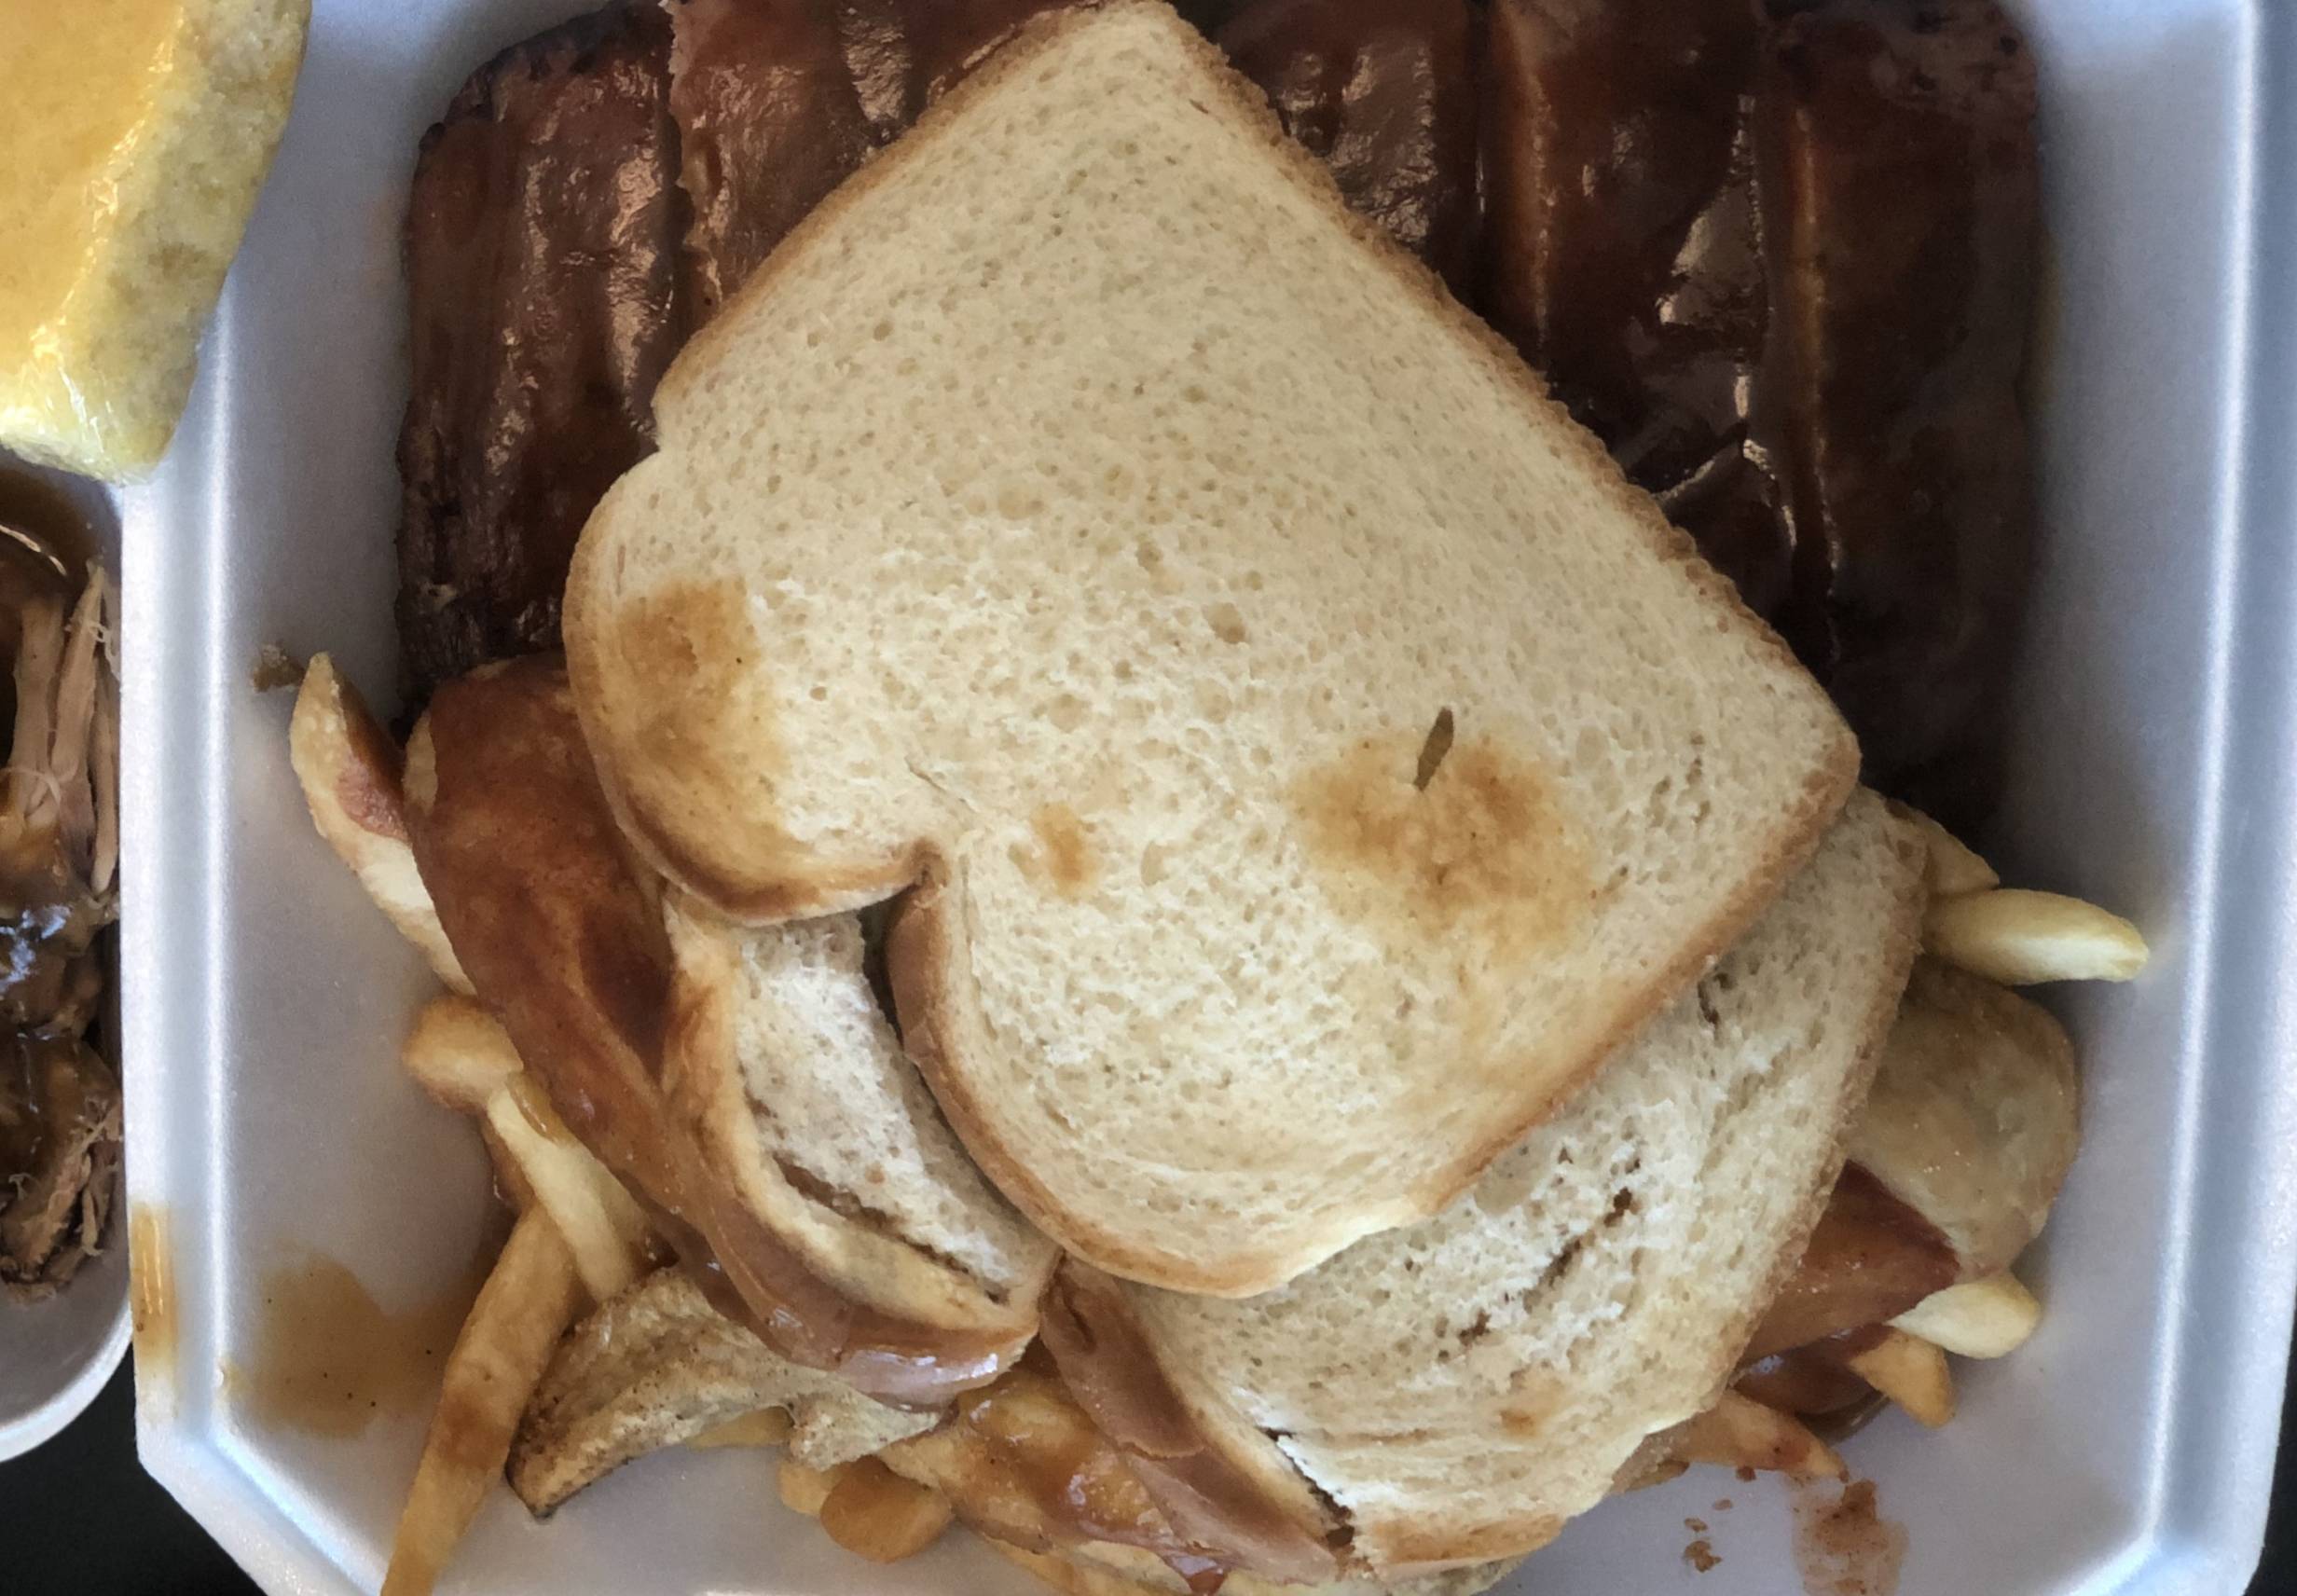 Two slices of white bread lay on top of wings and fries and ribs in a white styrofoam container. Photo by Alyssa Buckley.